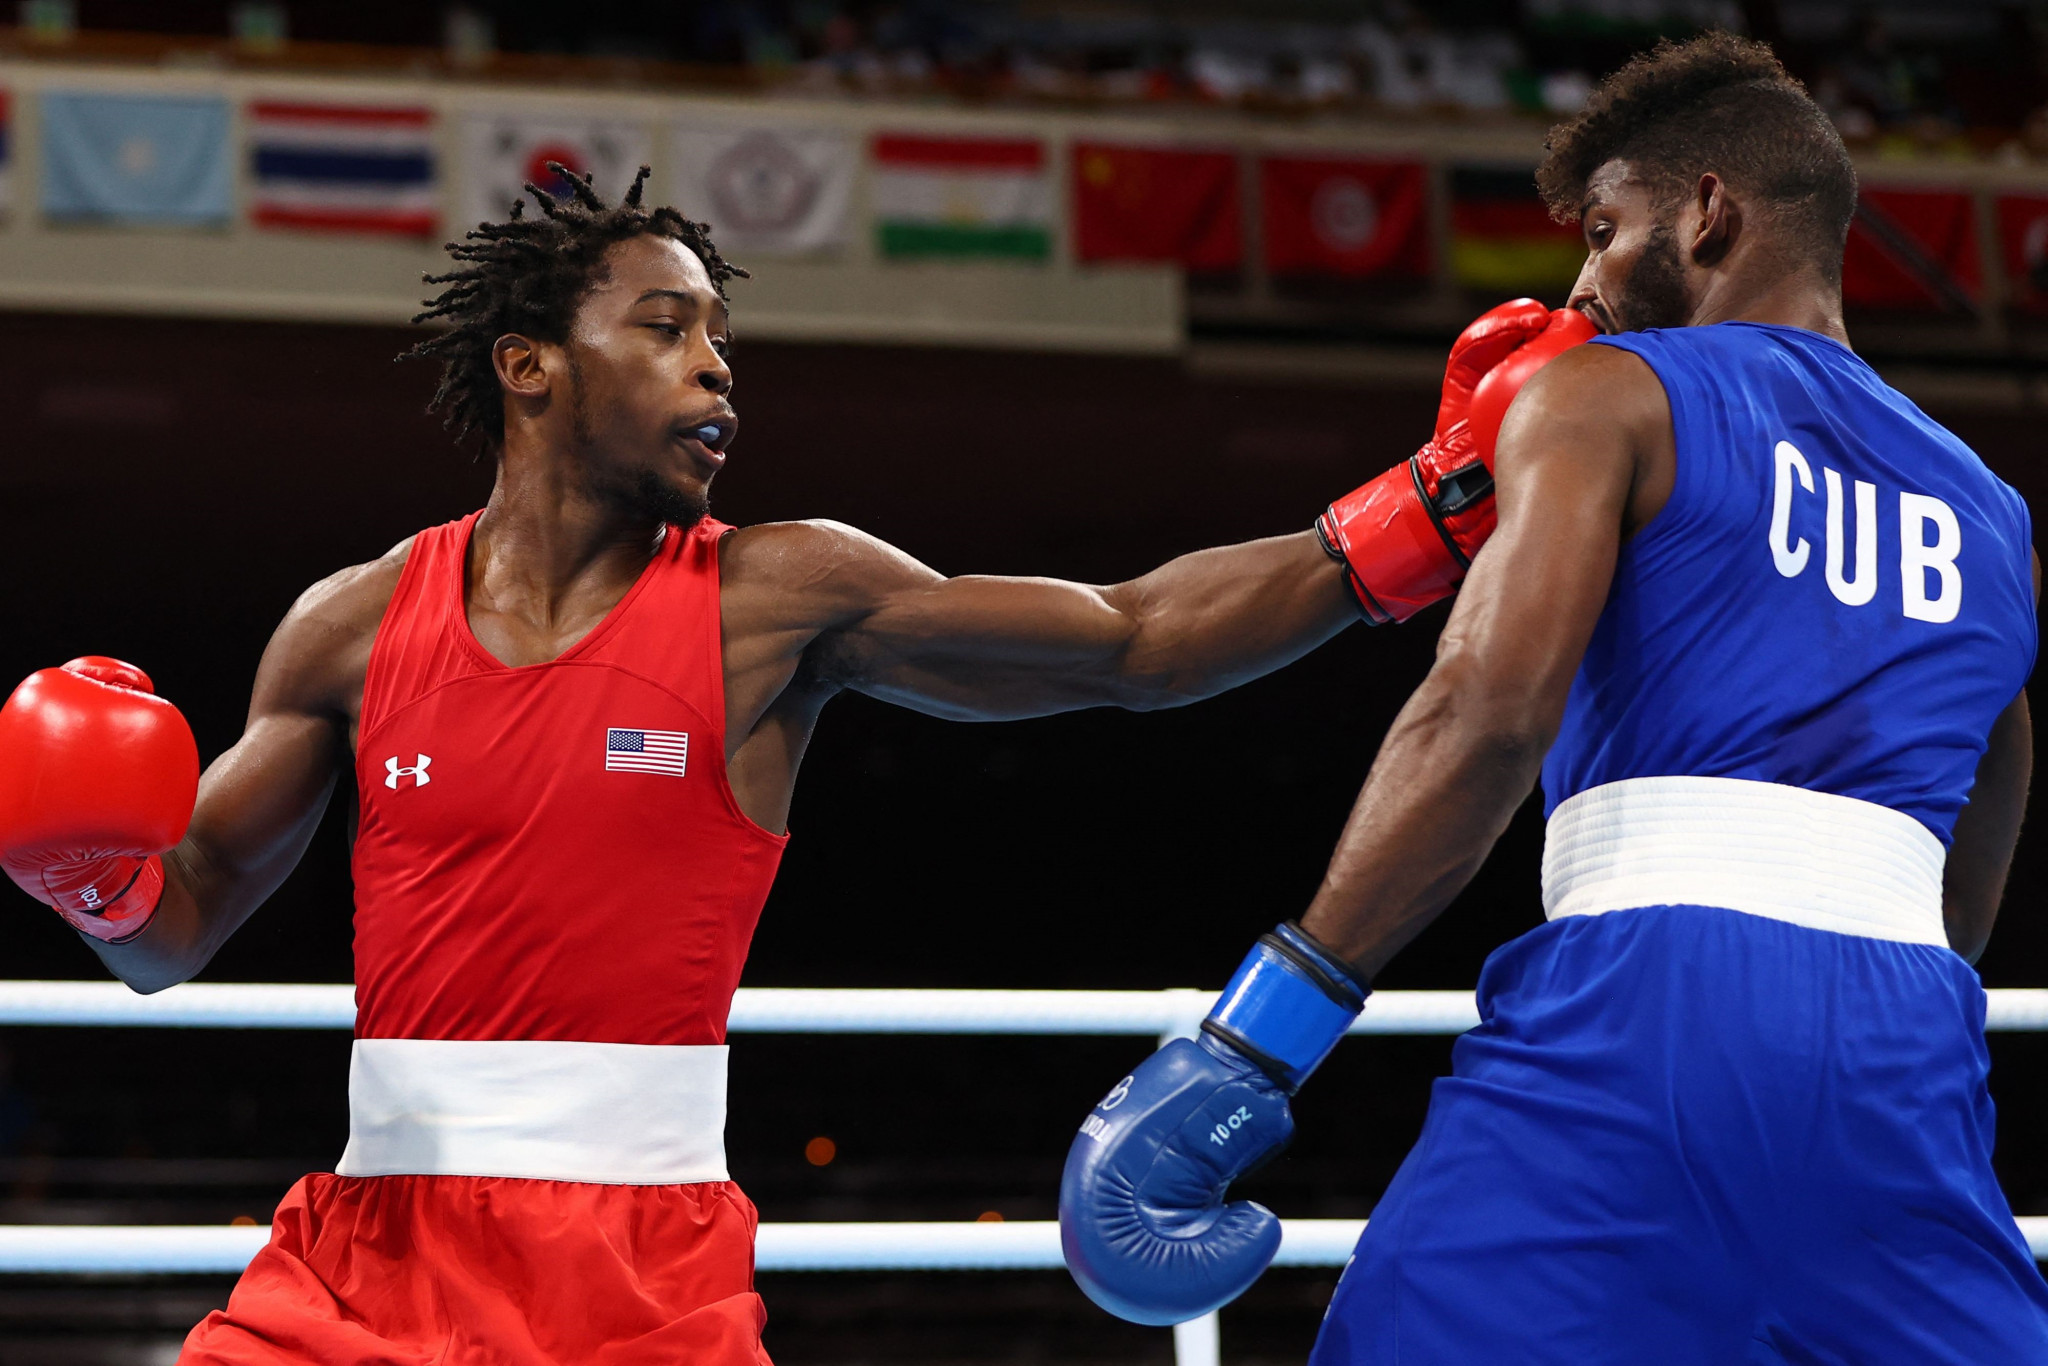 Boxing's place at the Los Angeles 2028 Olympic Games remains at risk, but Umar Kremlev warned the IOC it would lose out "if the most beautiful sport" was dropped ©Getty Images